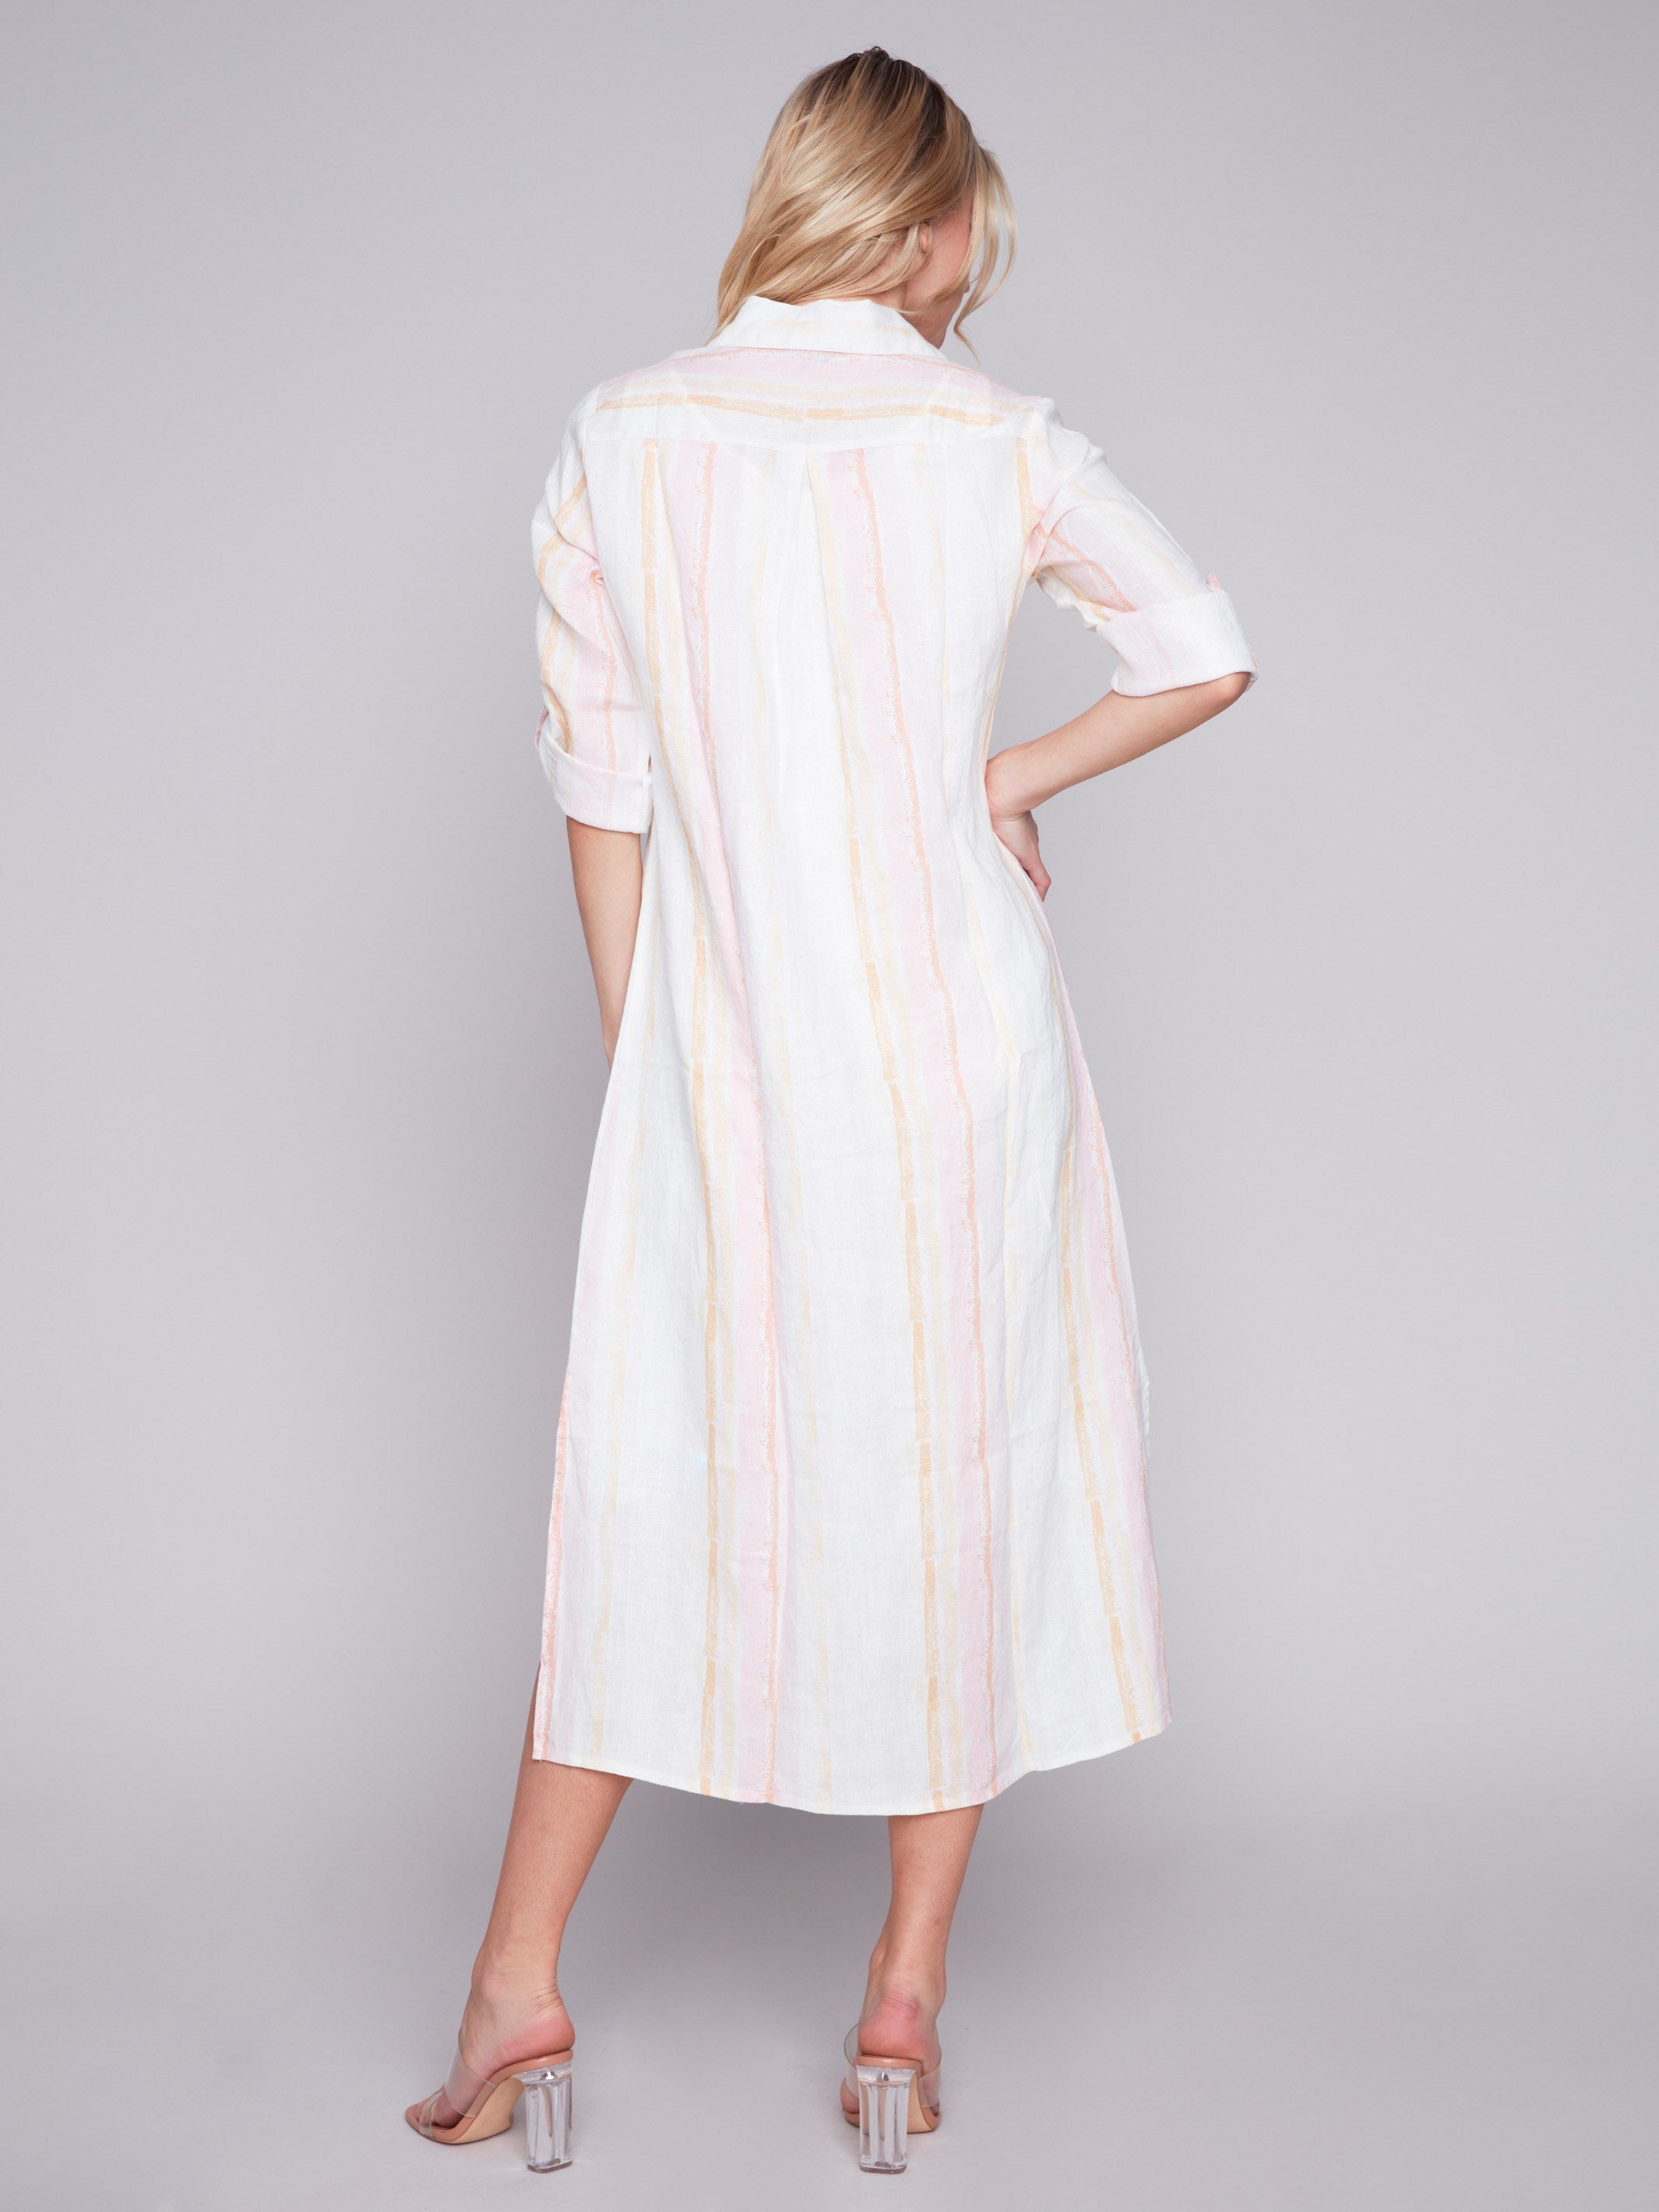 Striped Long Linen Tunic Dress - Tulip - Charlie B Collection Canada - Image 3